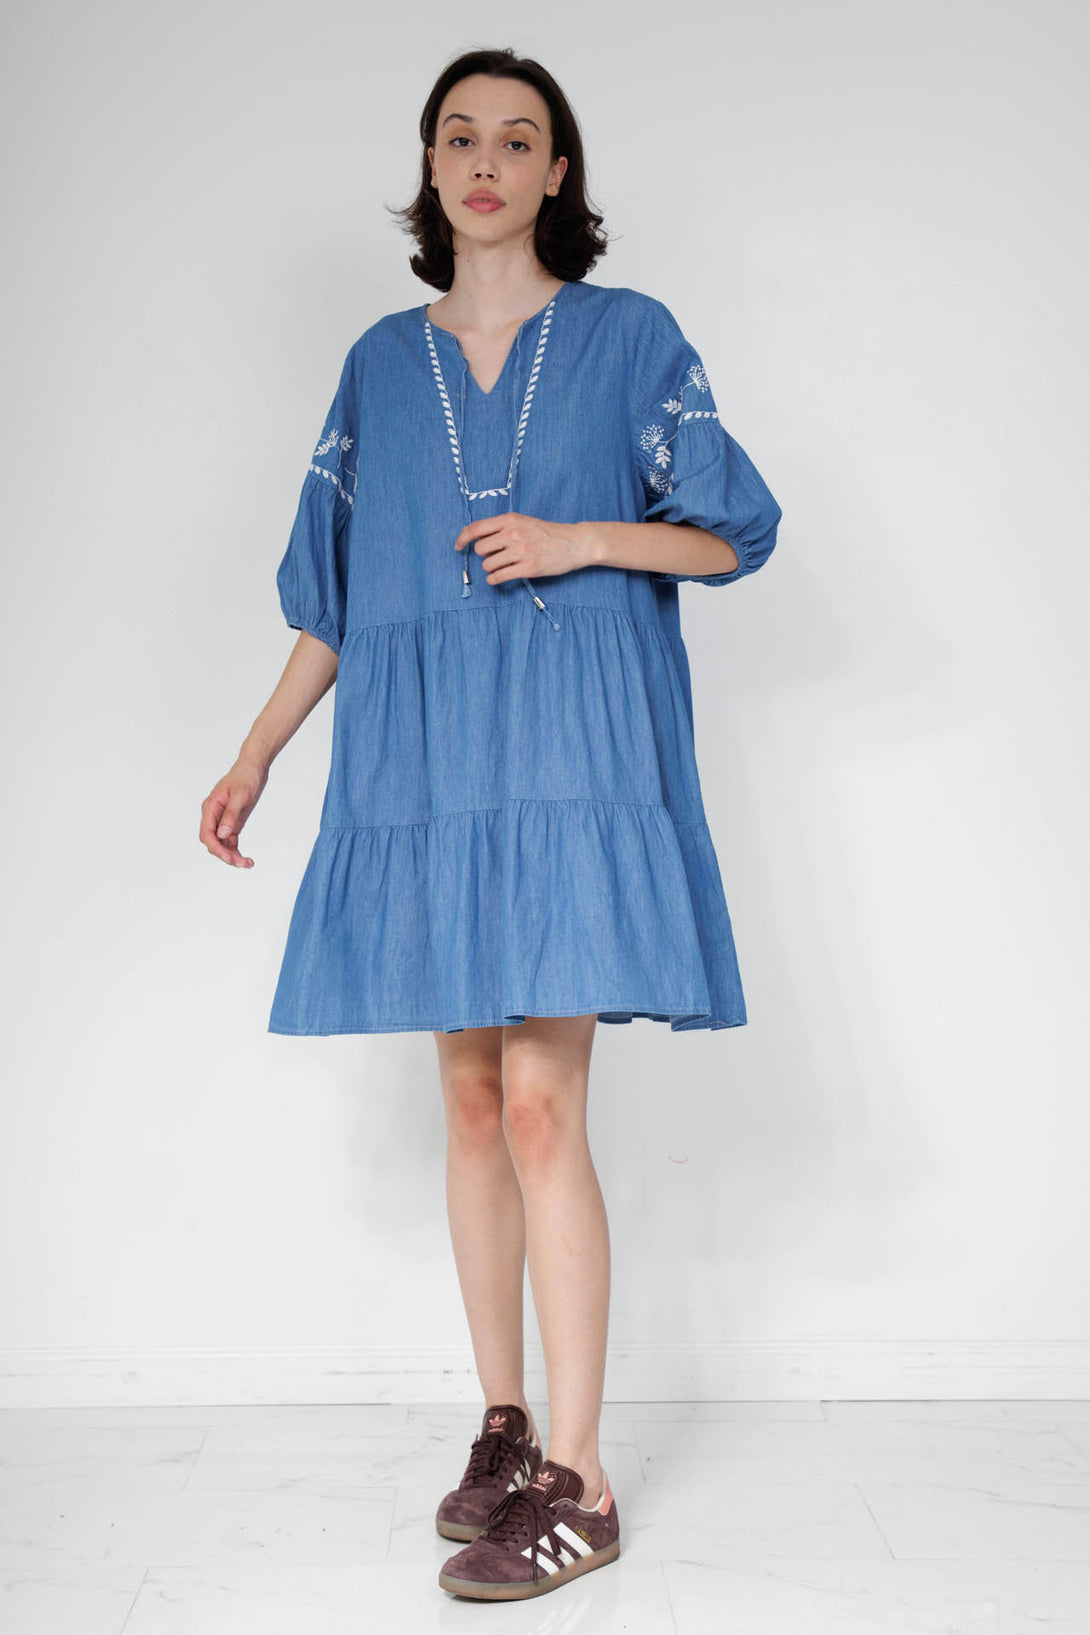 jeans dresses for women, casual denim outfits, HT 360 Collective, blue jean dress women's,